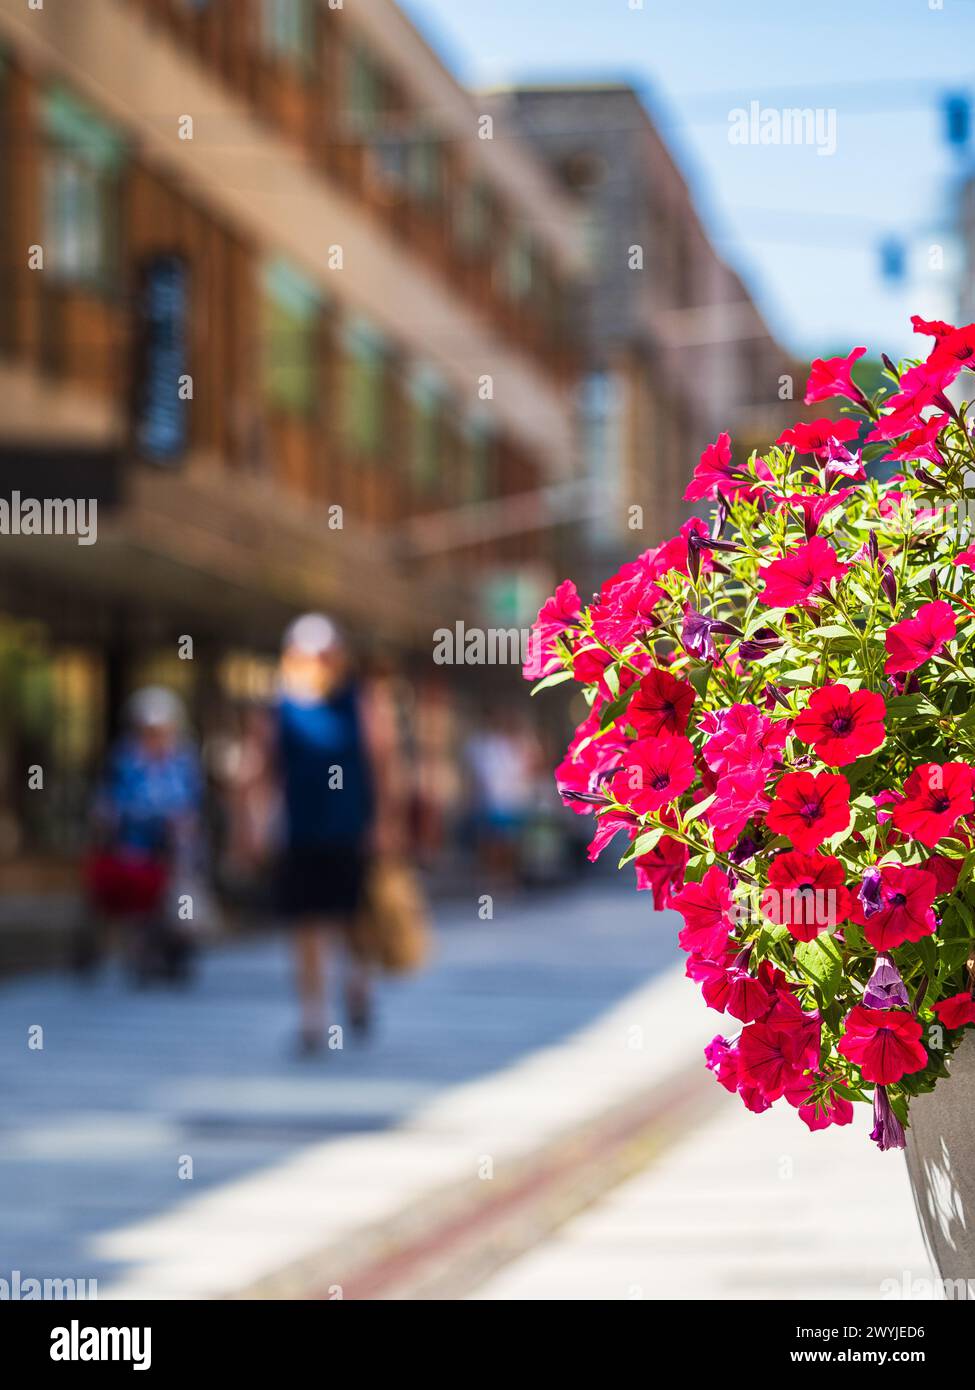 A white planter on a city street filled with vibrant red flowers, adding a pop of color to the urban landscape. The scene captures the beauty of natur Stock Photo